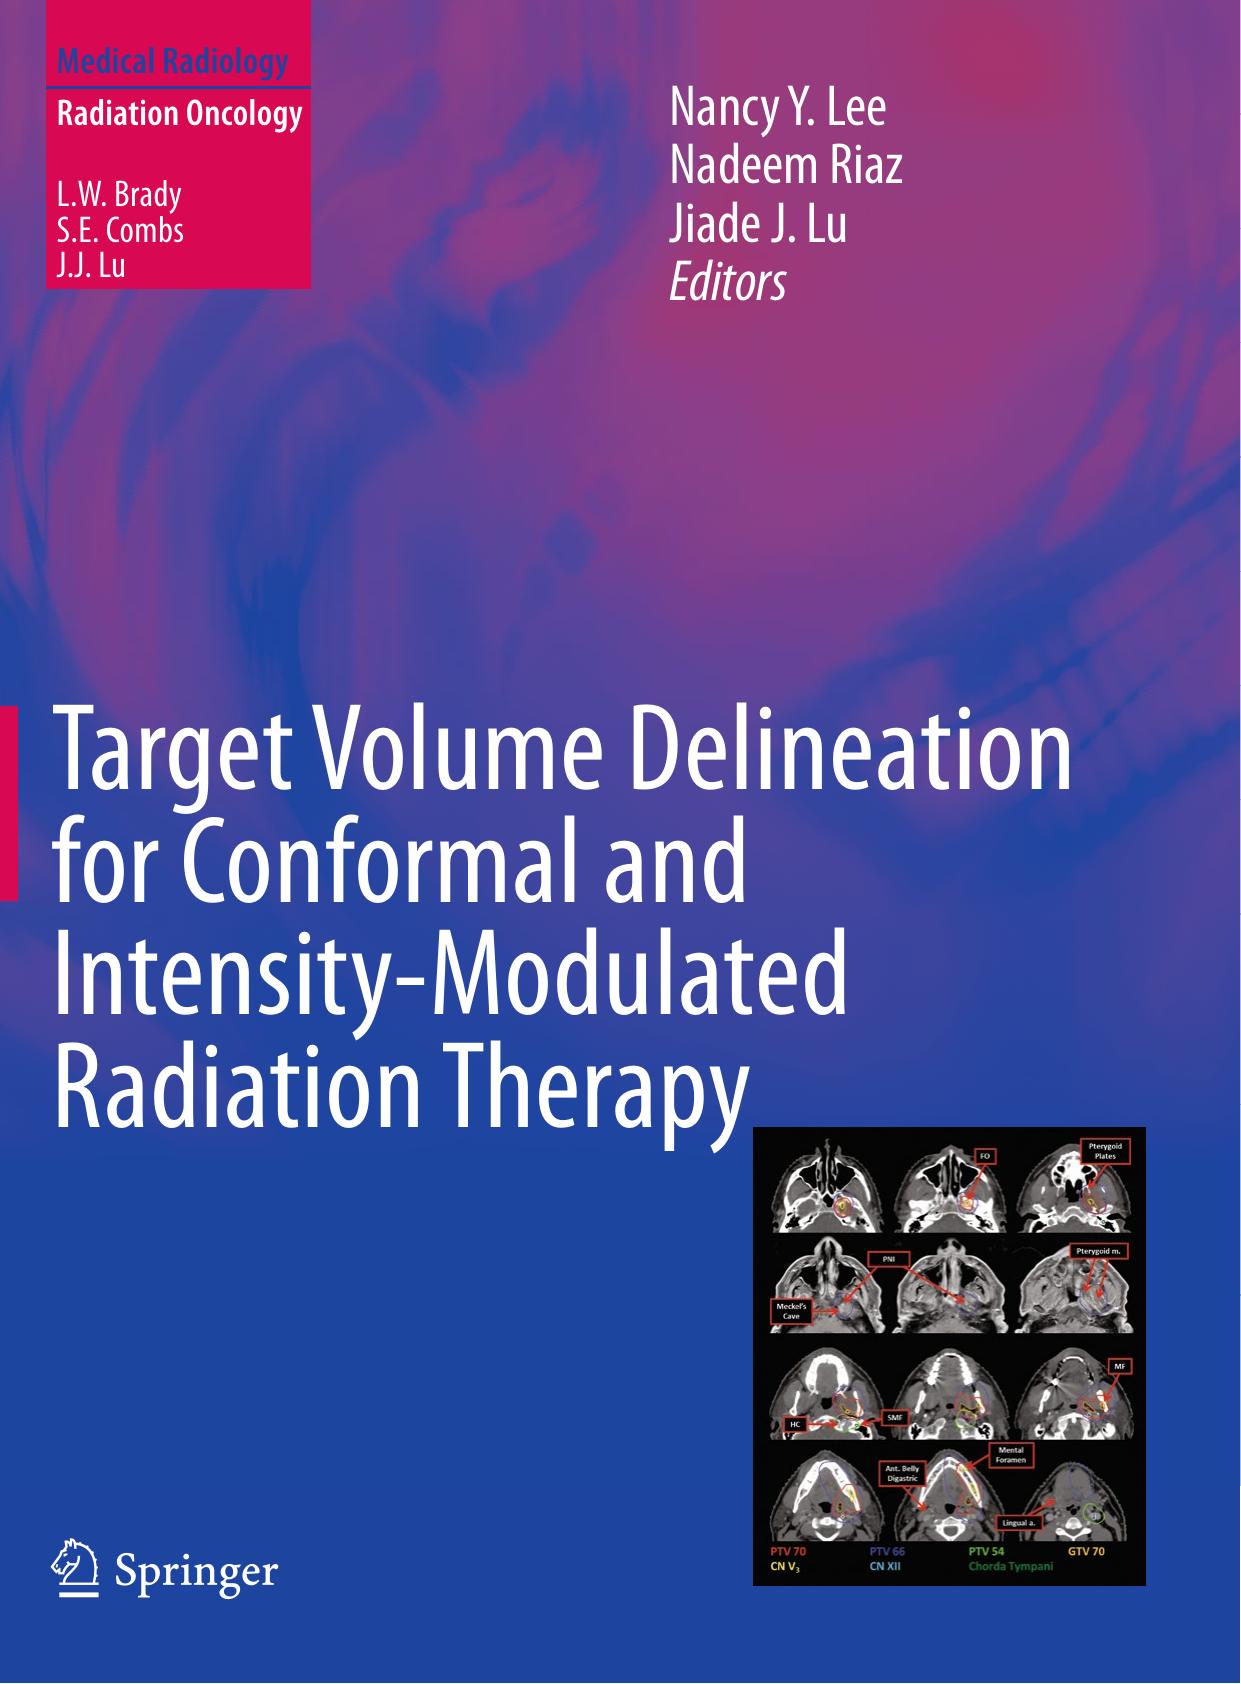 Target Volume Delineation for Conformal and Intensity-Modulated Radiation Therapy 2015